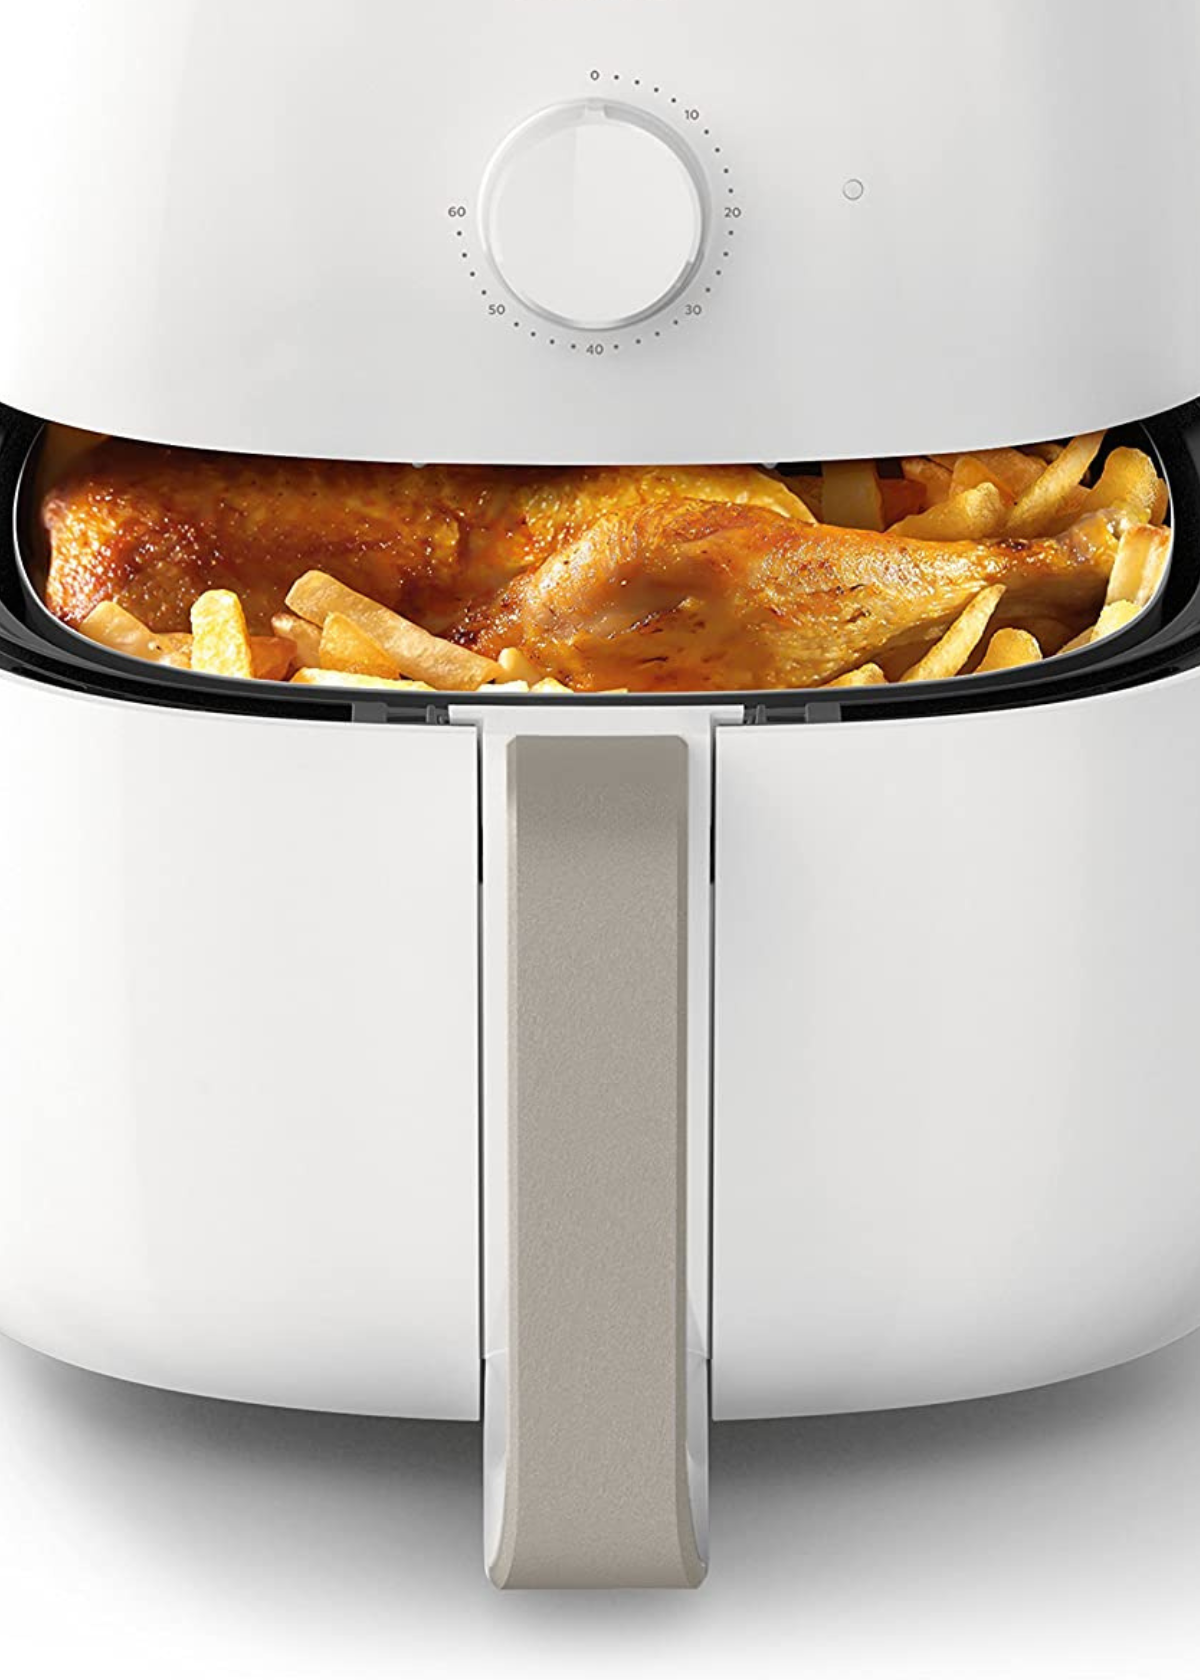 White Air Fryer: A Touch Of Elegance To Your Kitchen